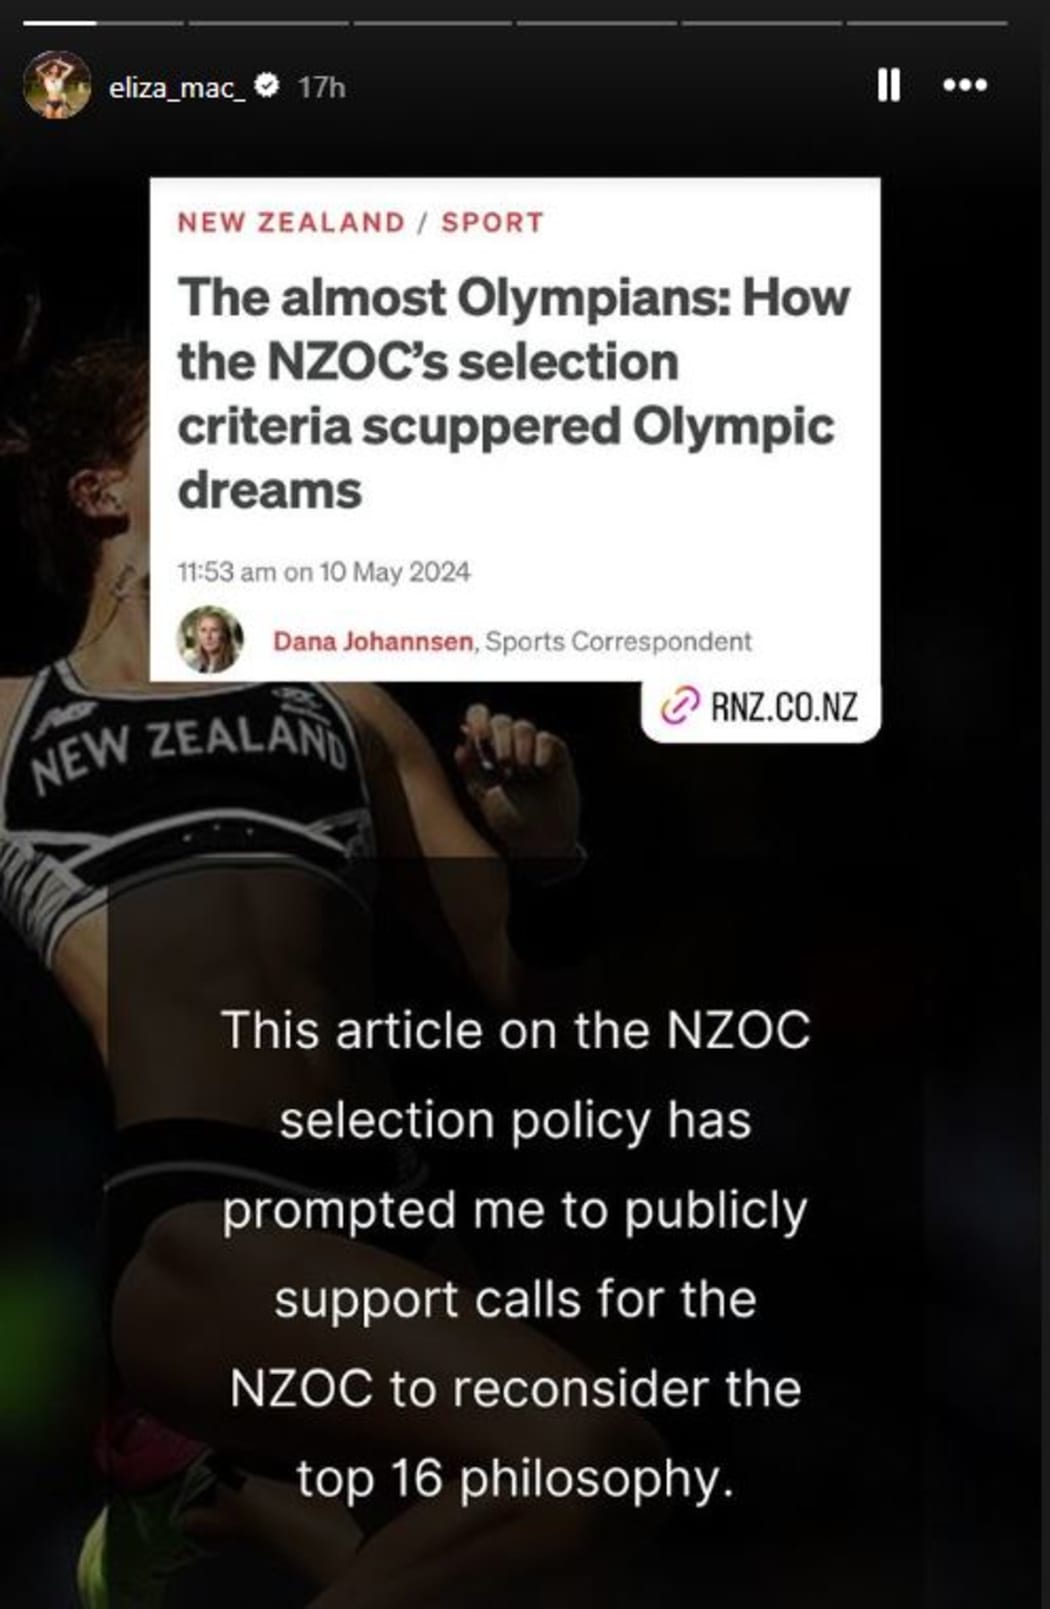 Eliza McCartney's Instagram post critiquing the New Zealand Olympic Committee's selection policy.